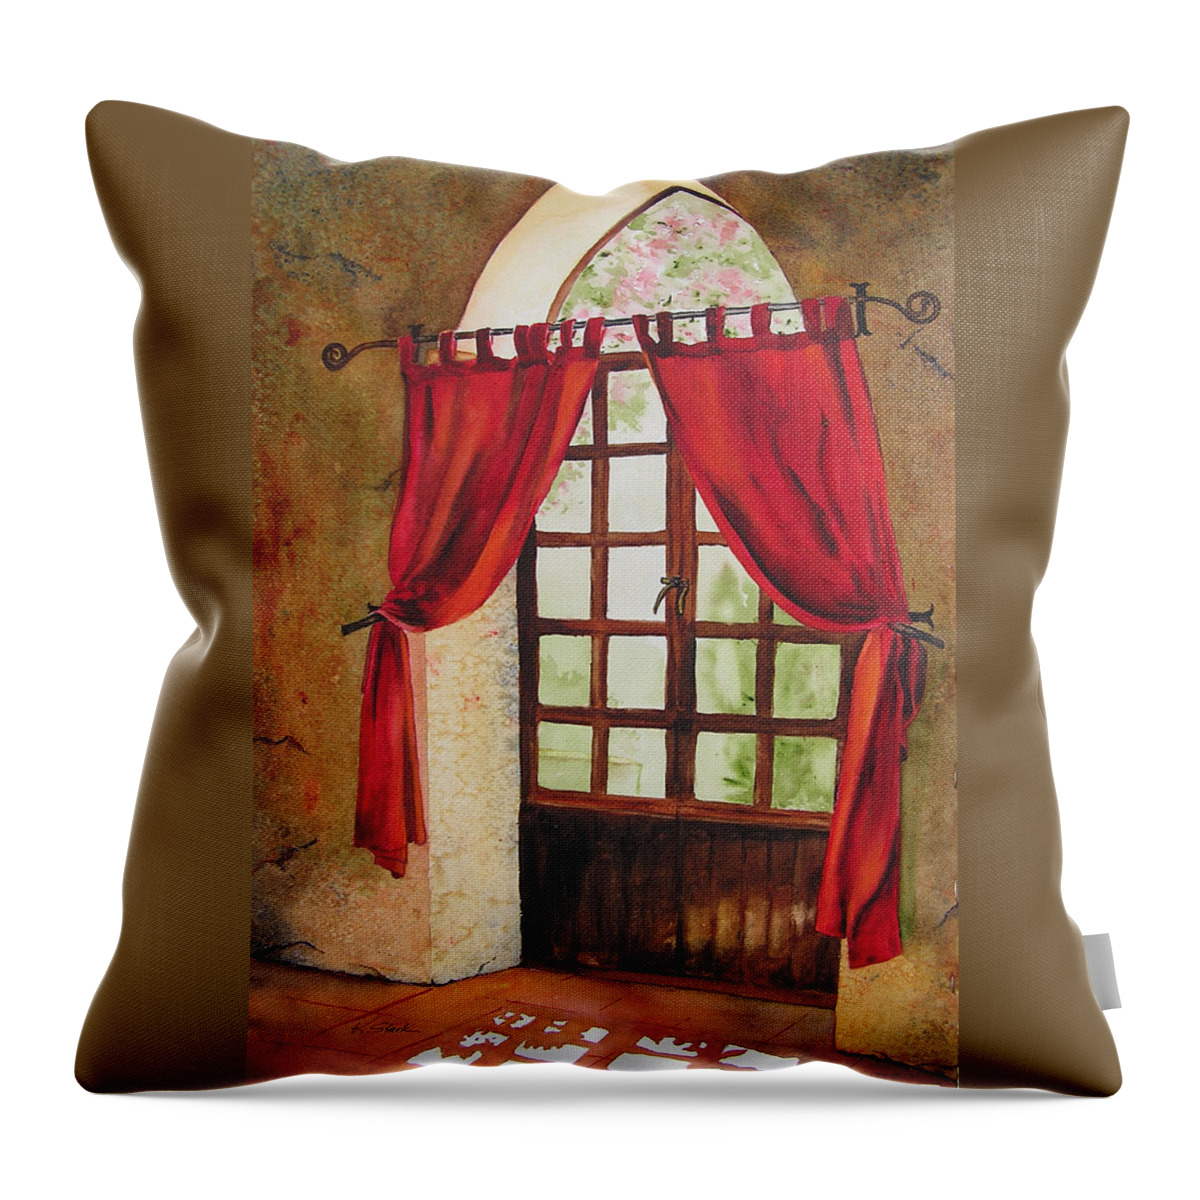 Curtain Throw Pillow featuring the painting Red Curtain by Karen Stark